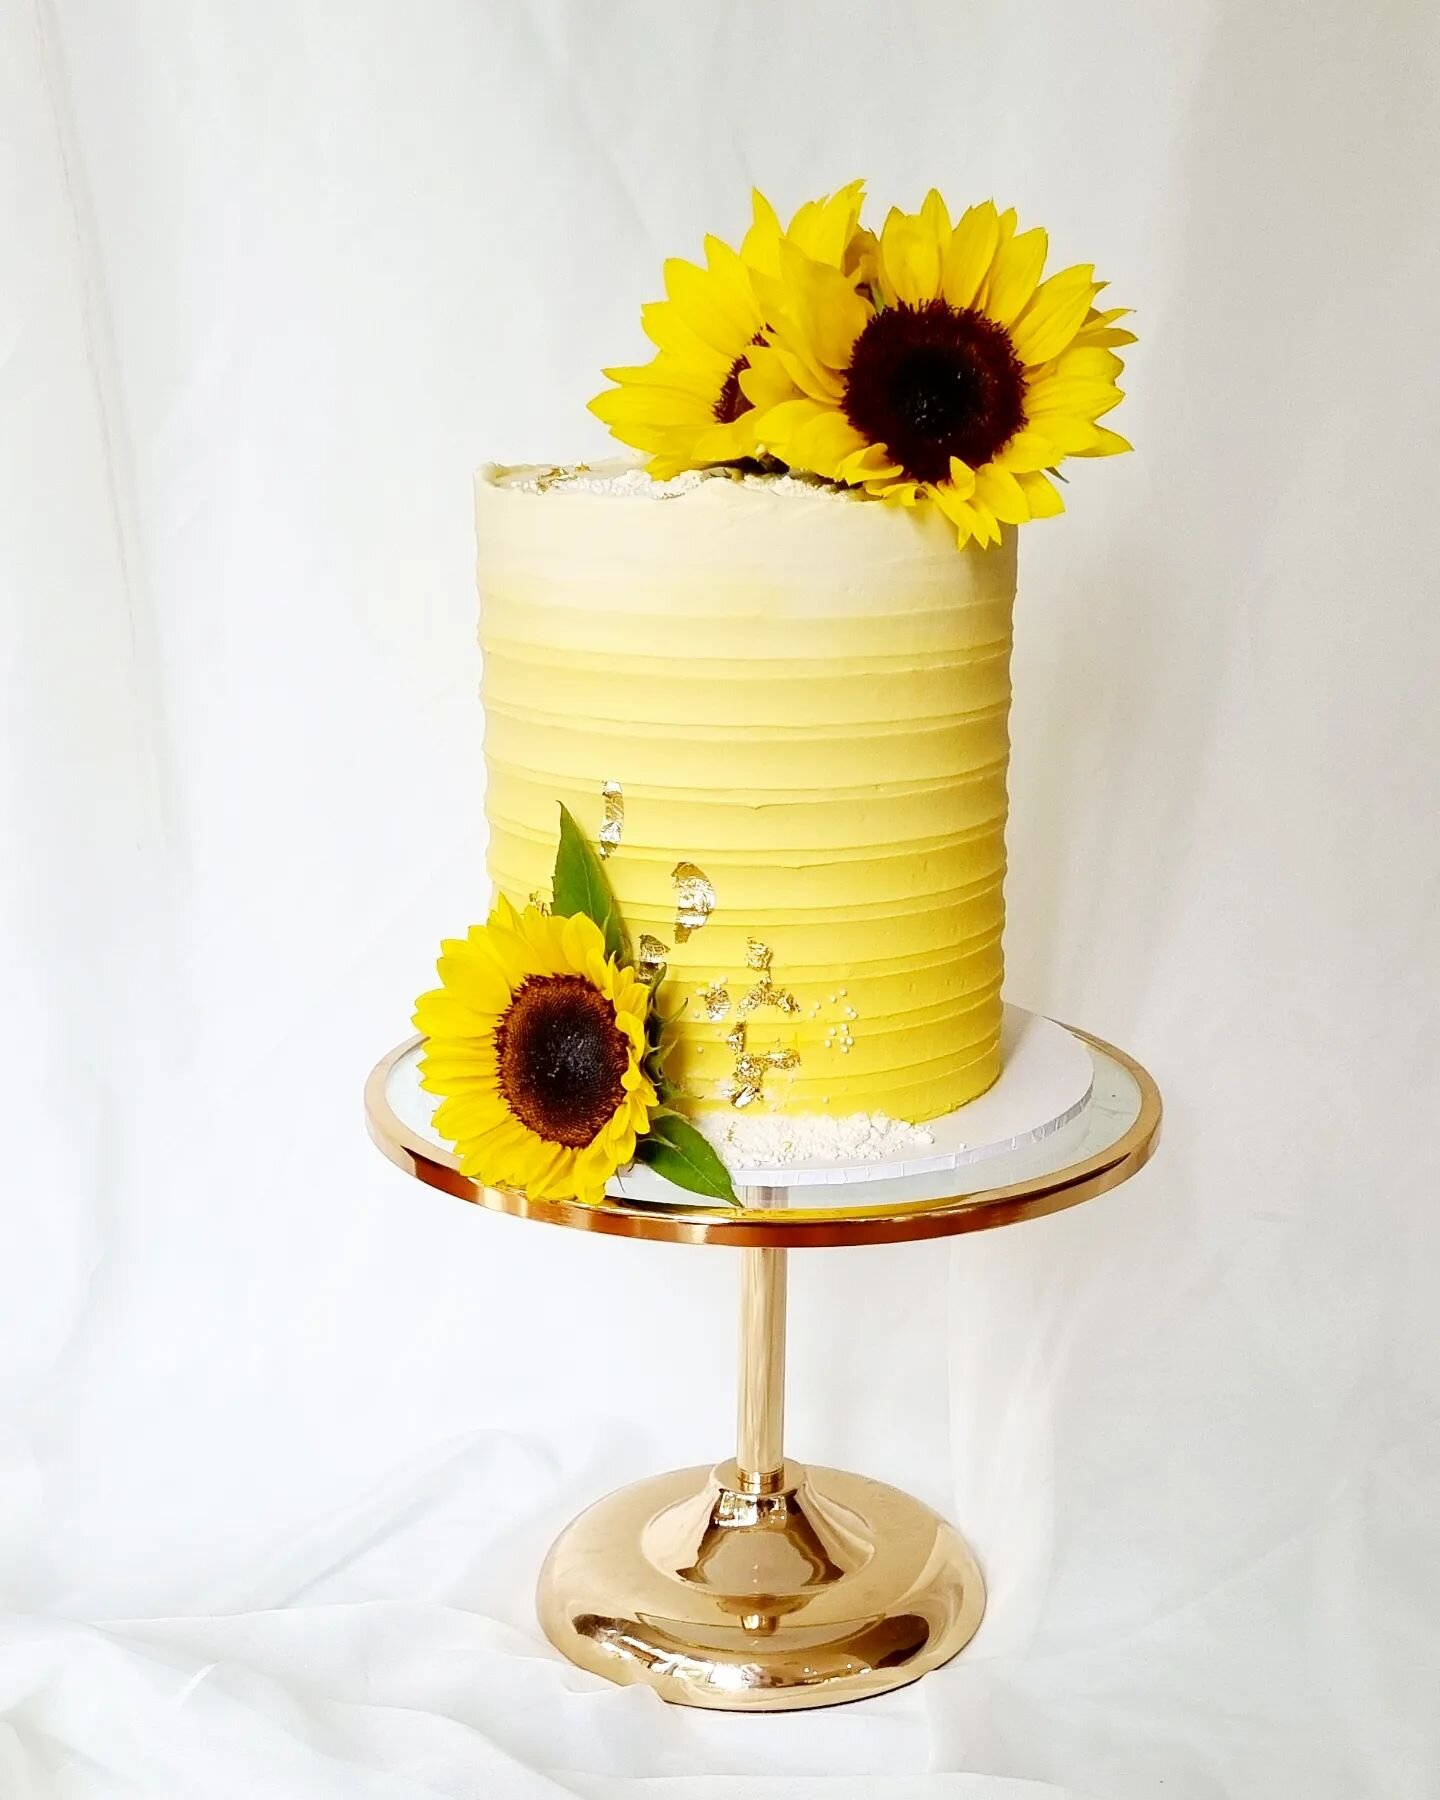 A little bit of sunshine to brighten up this rainy day. 

Wishing you all a lovely day.

Lemon buttermilk cake layered with lemon curd and vanilla buttercream. 
For your next special occasion cake or cupcakes please visit our website or email us at l